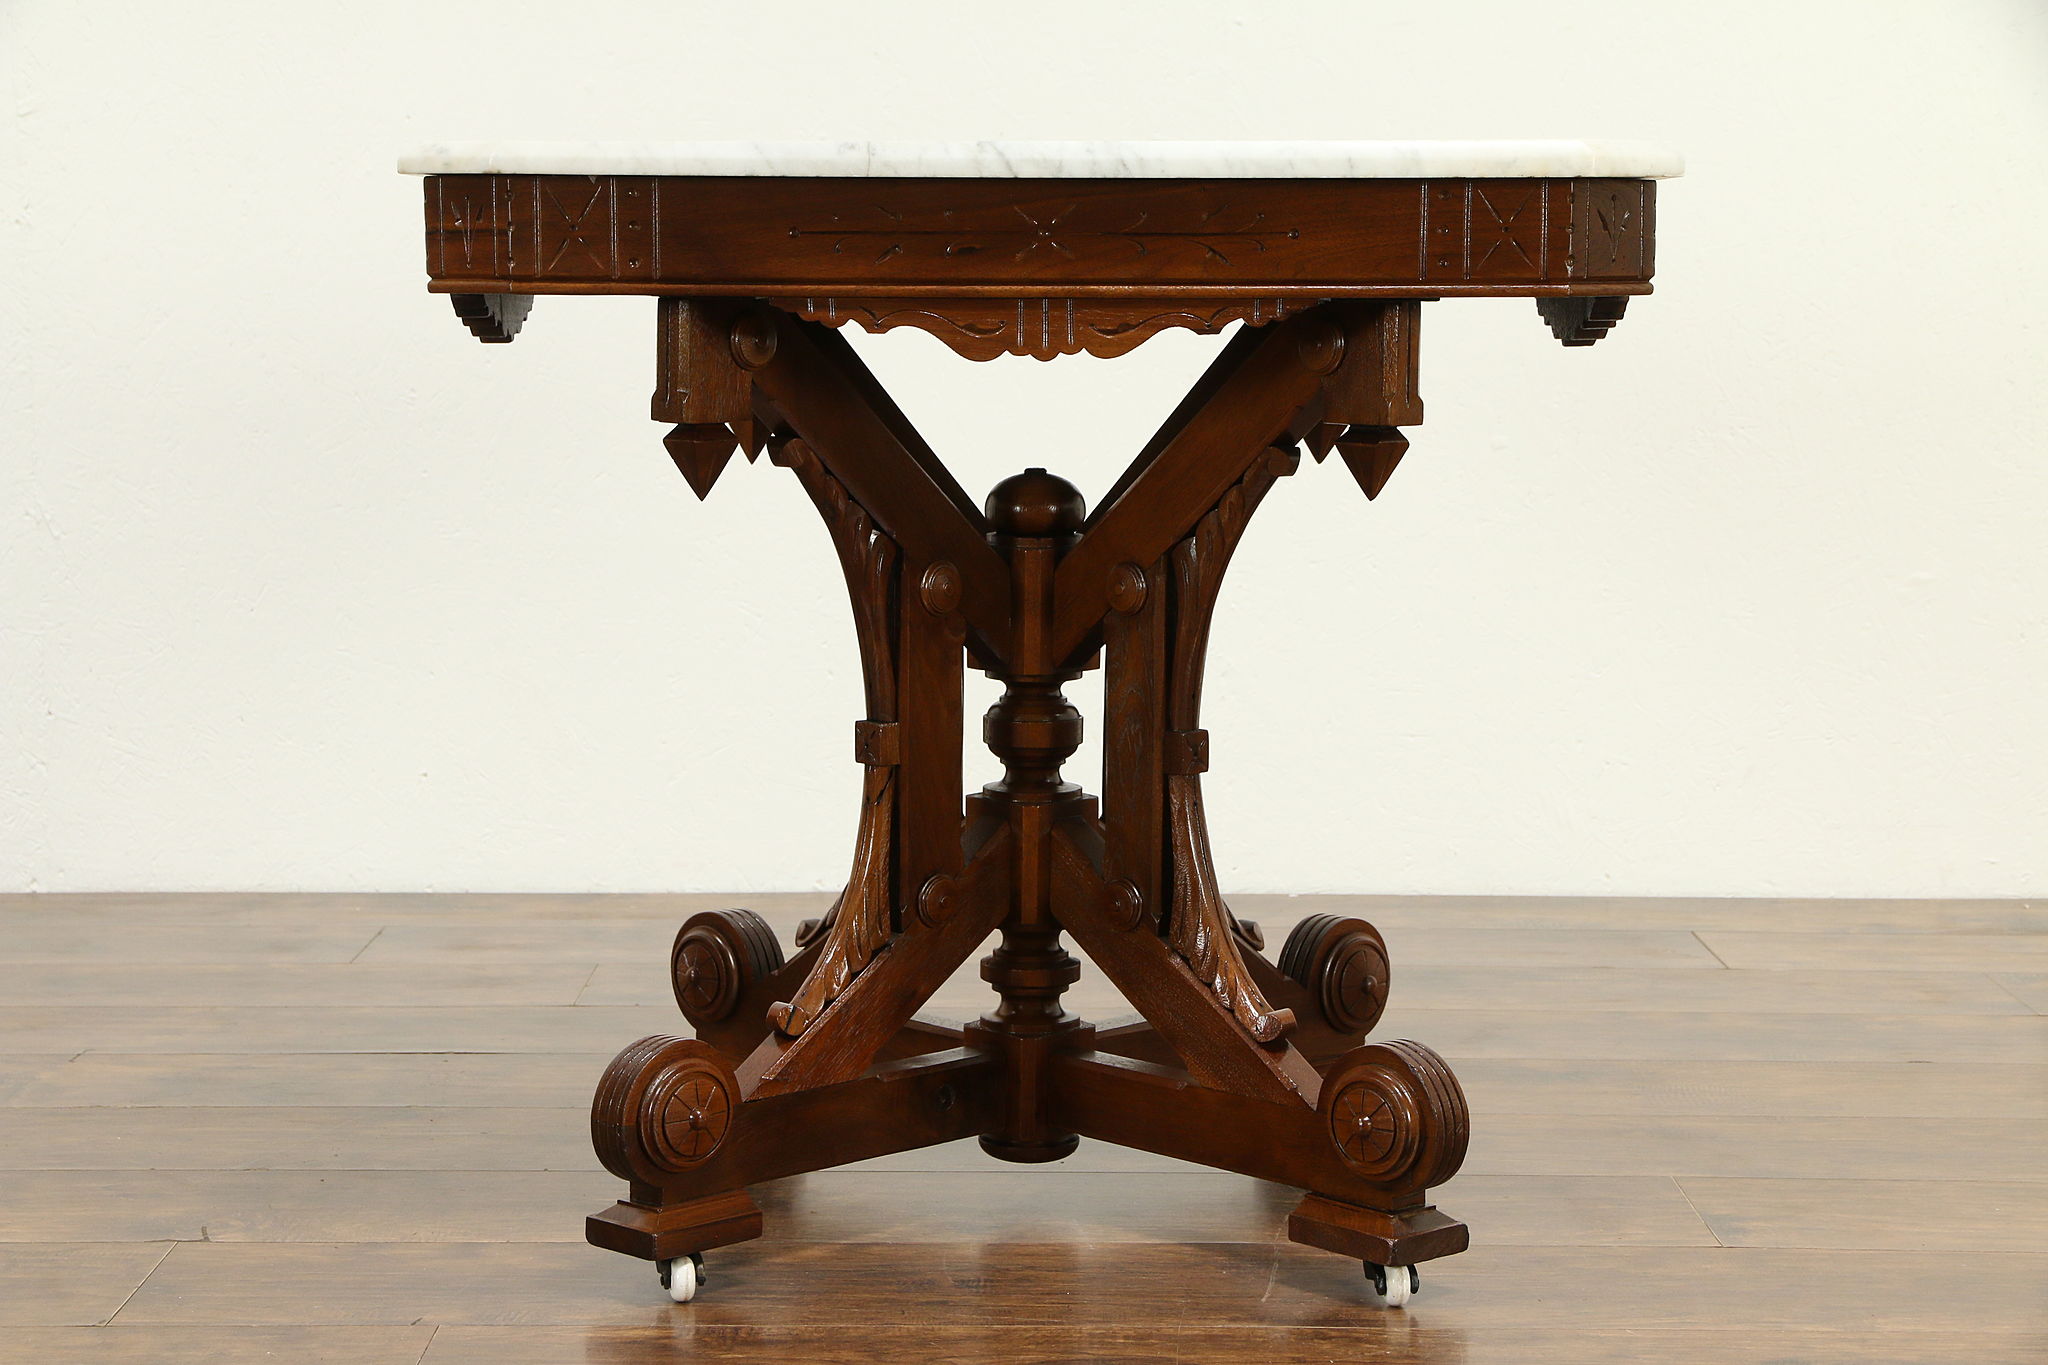 Details about   Ornate Burl Walnut Victorian Eastlake Marble Top Table with Fancy Carved Base 